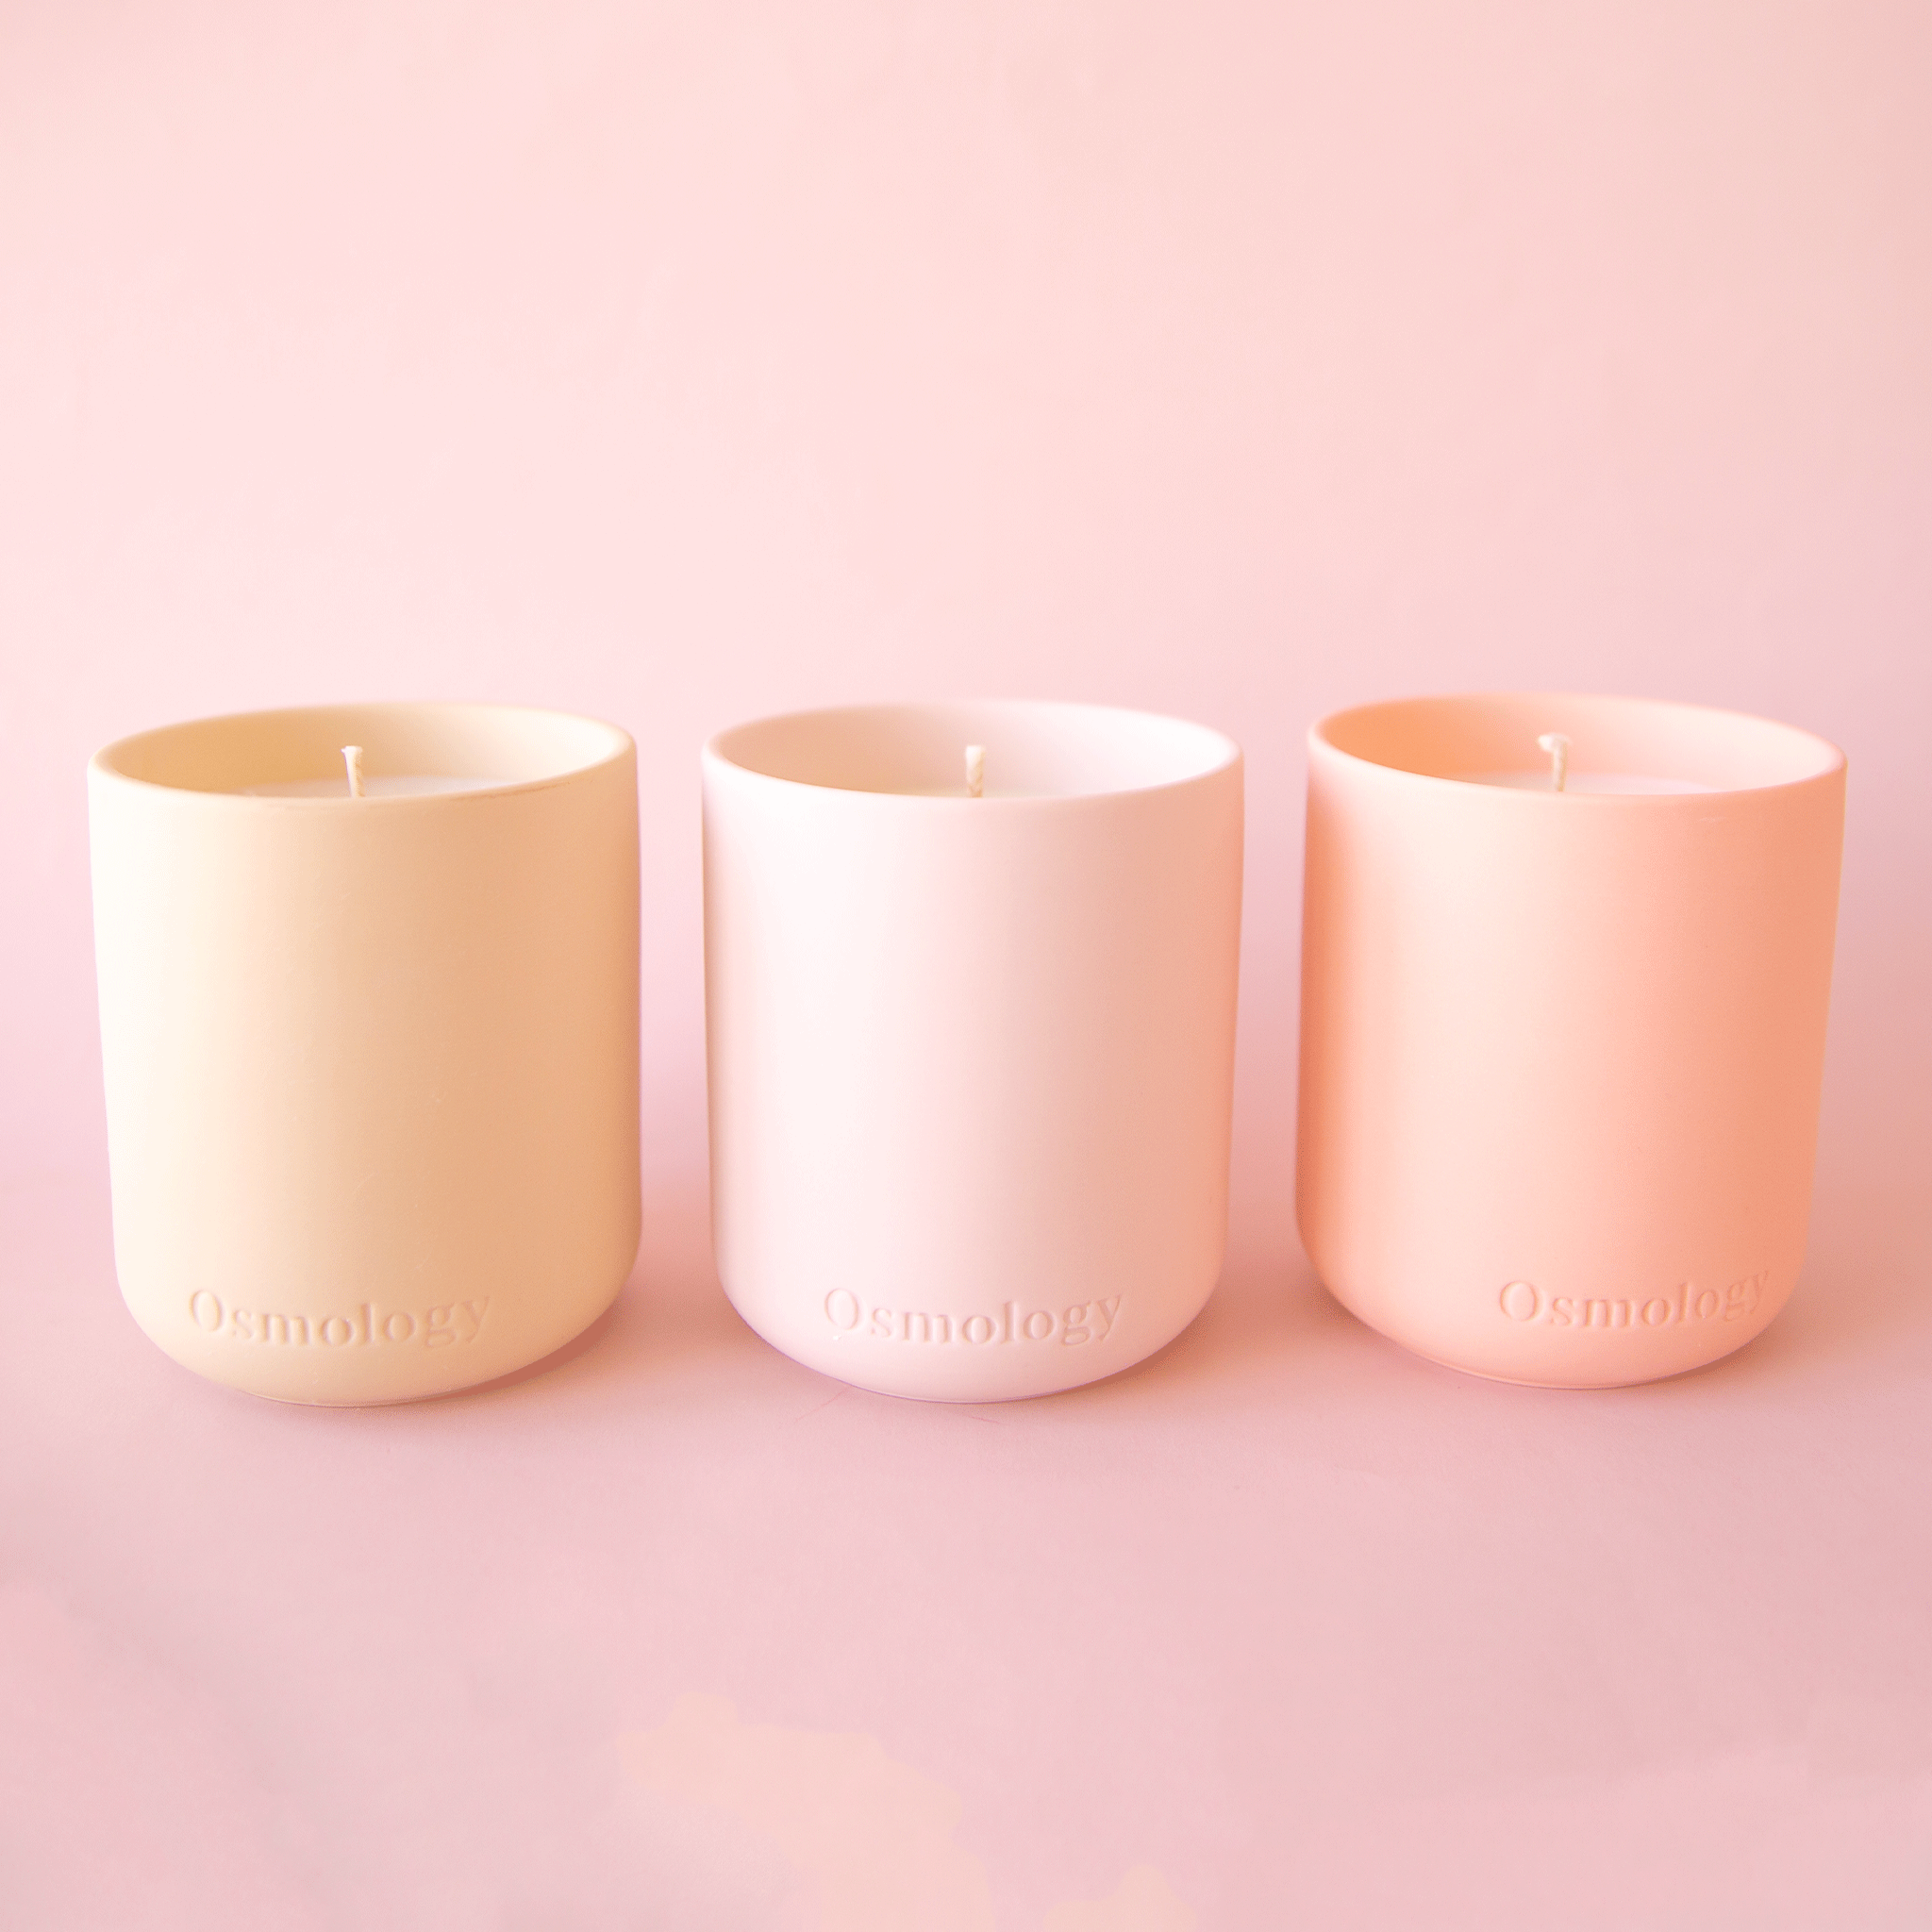 On a pink background is three clay candles in shades of peach and pink.